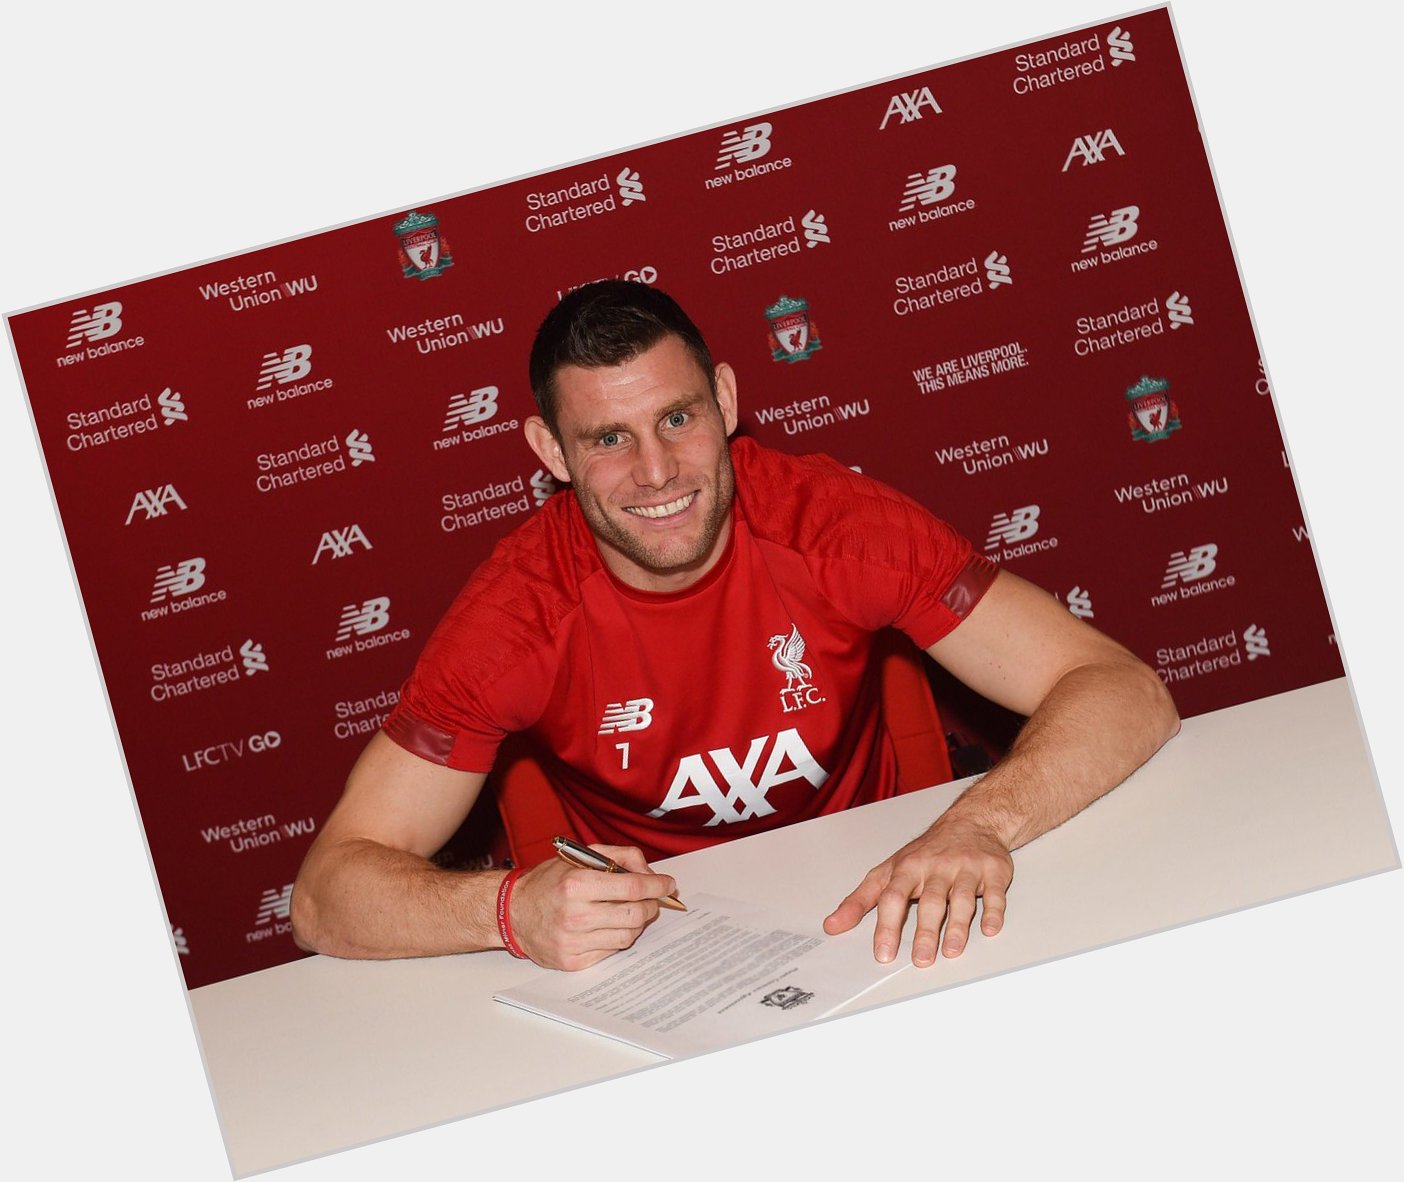 Happy birthday James Milner may you win another title with Liverpool   YNWA 